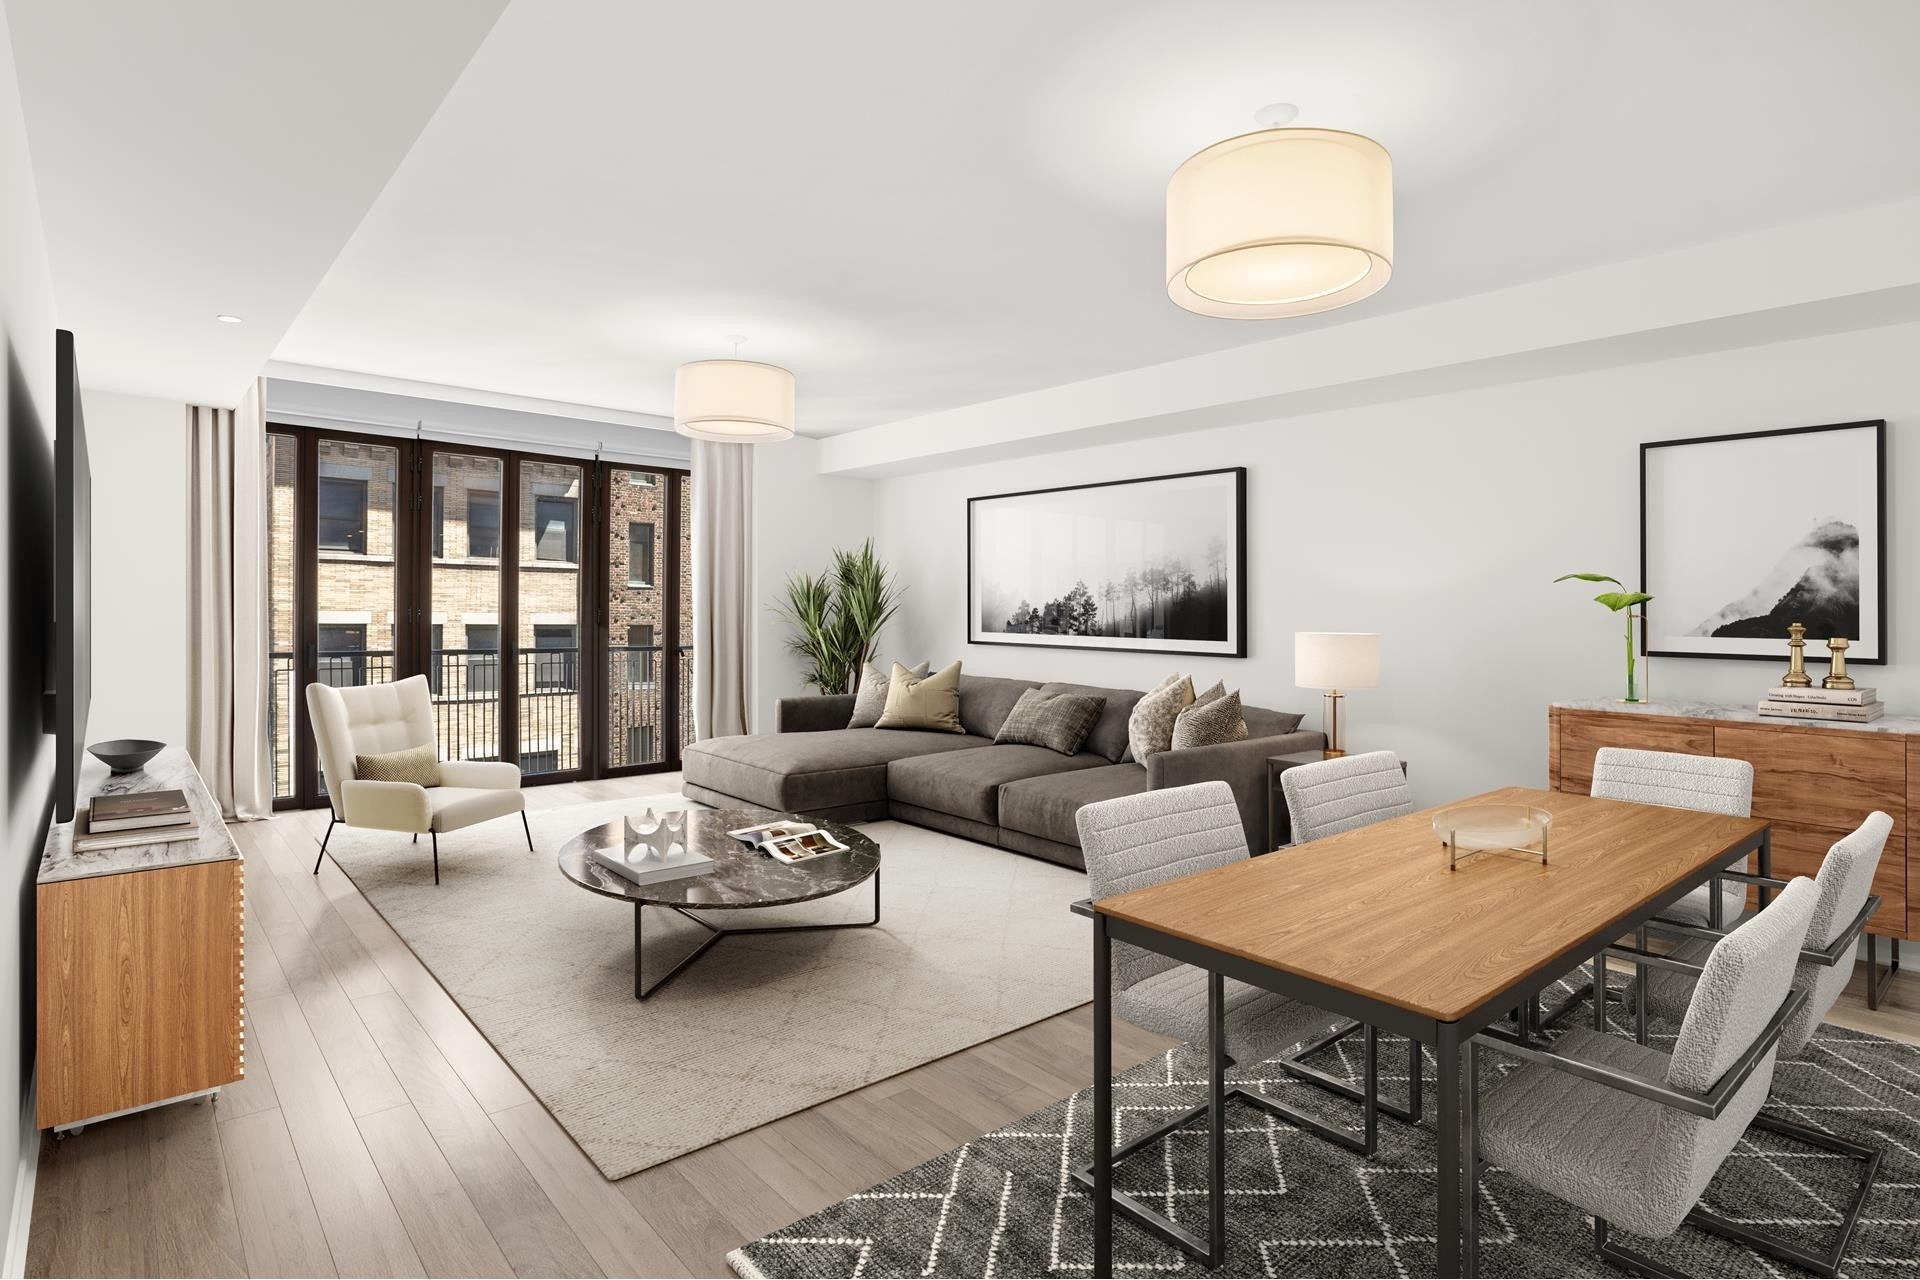 Condominium for Sale at Two Ten West 77, 210 W 77TH ST, 7EAST Upper West Side, New York, New York 10024